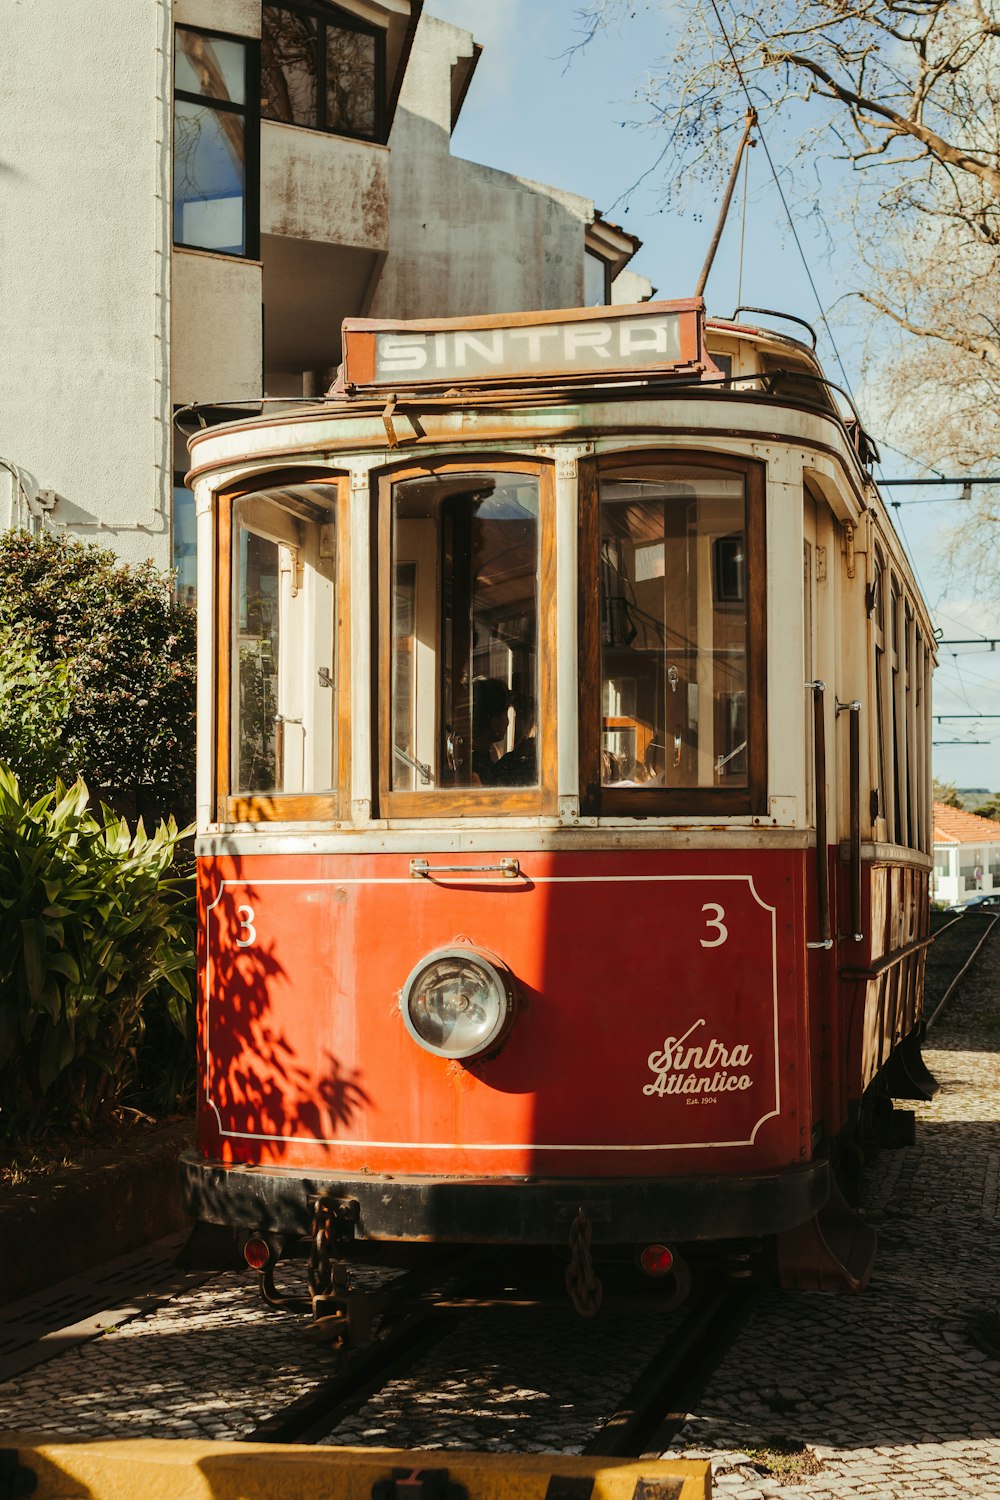 a red and white trolley car traveling down a street